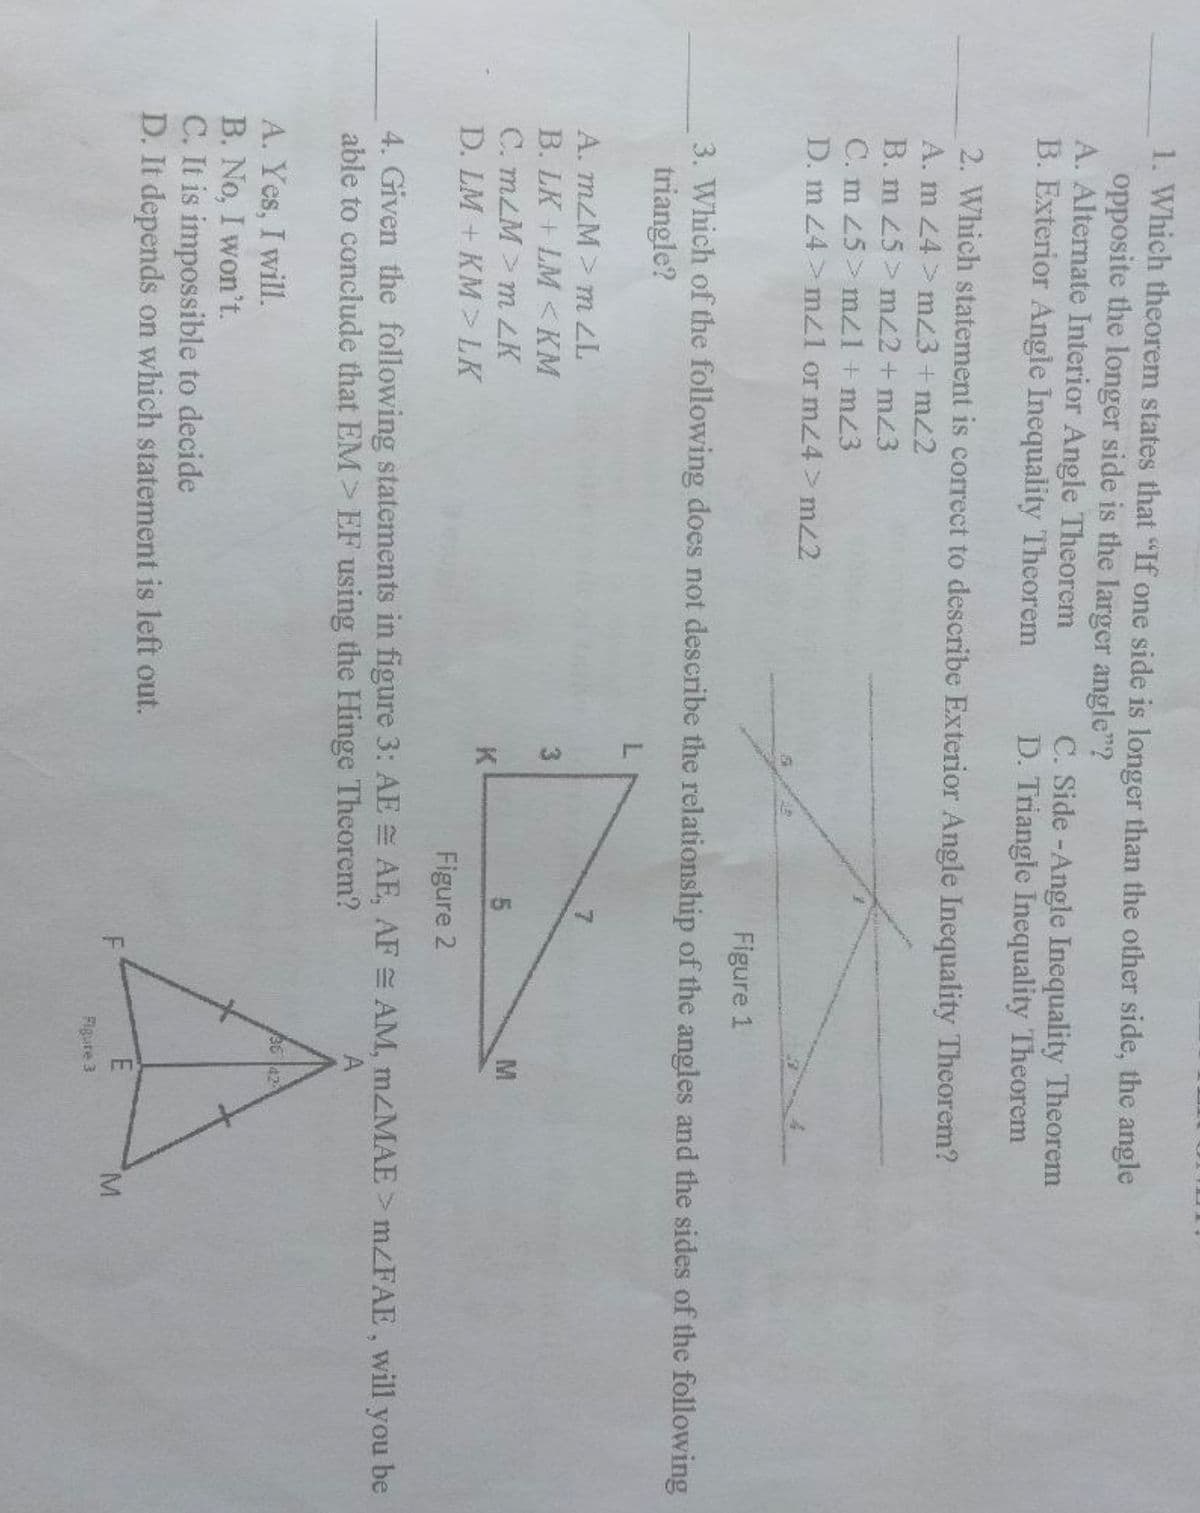 1. Which theorem states that "If one side is longer than the other side, the angle
opposite the longer side is the larger angle"?
A. Alternate Interior Angle Theorem
B. Exterior Angle Inequality Theorem
C. Side-Angle Inequality Theorem
D. Triangle Inequality Theorem
2. Which statement is correct to describe Exterior Angle Inequality Theorem?
A. m 24>m<3 + m22
B. m 25> m/2 + m23
C. m 25> mz1+ m23
D. m 24> m/1 or m24>m/2
Figure 1
3. Which of the following does not describe the relationship of the angles and the sides of the following
triangle?
A. m/M > m ZL
7
3
B. LK+LM <KM
CmLM>m LK
5
M
K
D. LM + KM > LK
Figure 2
AE, AF = AM, mzMAE > m/FAE, will you be
4. Given the following statements in figure 3: AE
able to conclude that EM> EF using the Hinge Theorem?
A
36 42
A. Yes, I will.
B. No, I won't.
C. It is impossible to decide
D. It depends on which statement is left out.
F
E
Figure 3
M